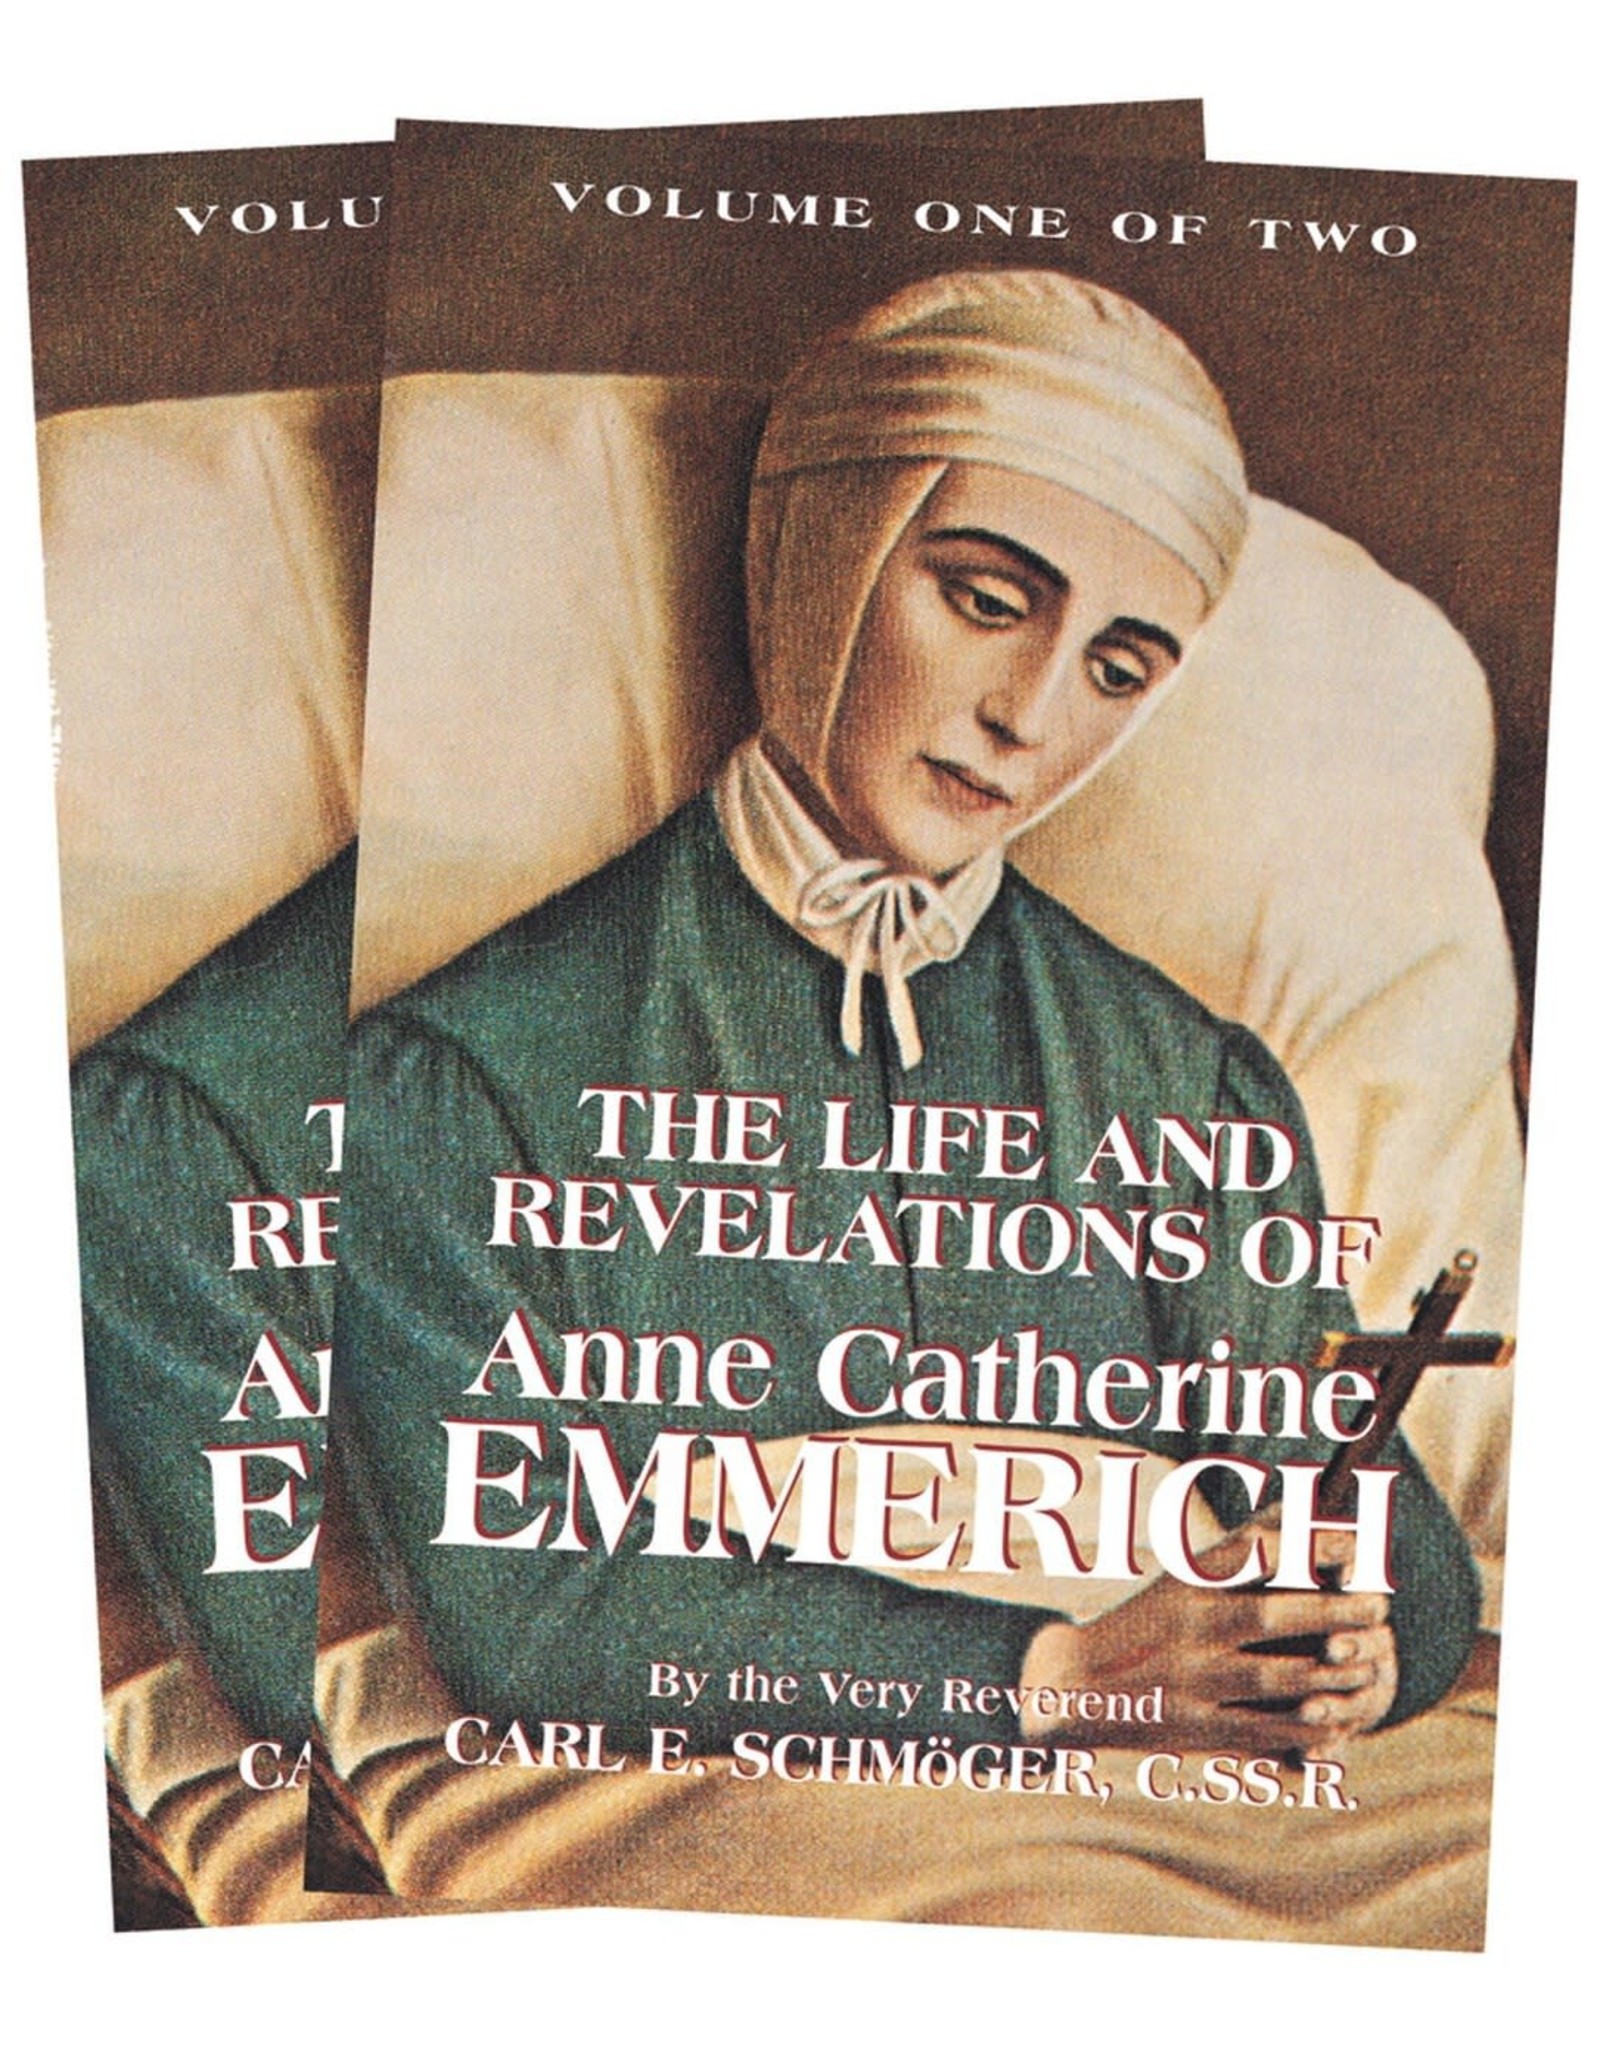 Tan Books The Life and Revelations of Anne Catherine Emmerich: Volume 1 by the Very Reverend Carl E. Schmoger, C.SS.R. (Paperback)